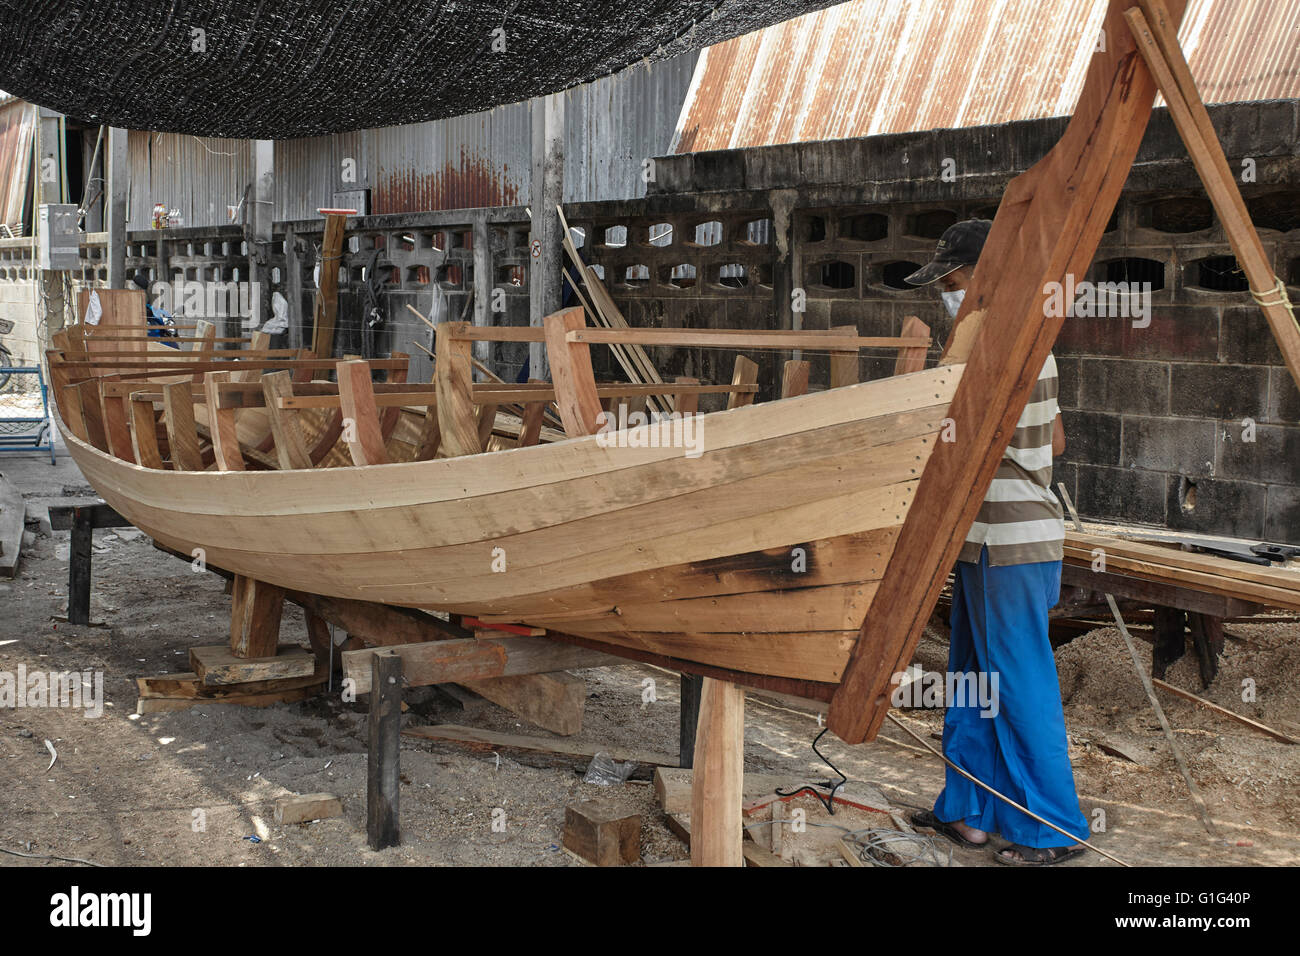 Thai craftsman building a traditional wooden boat ...